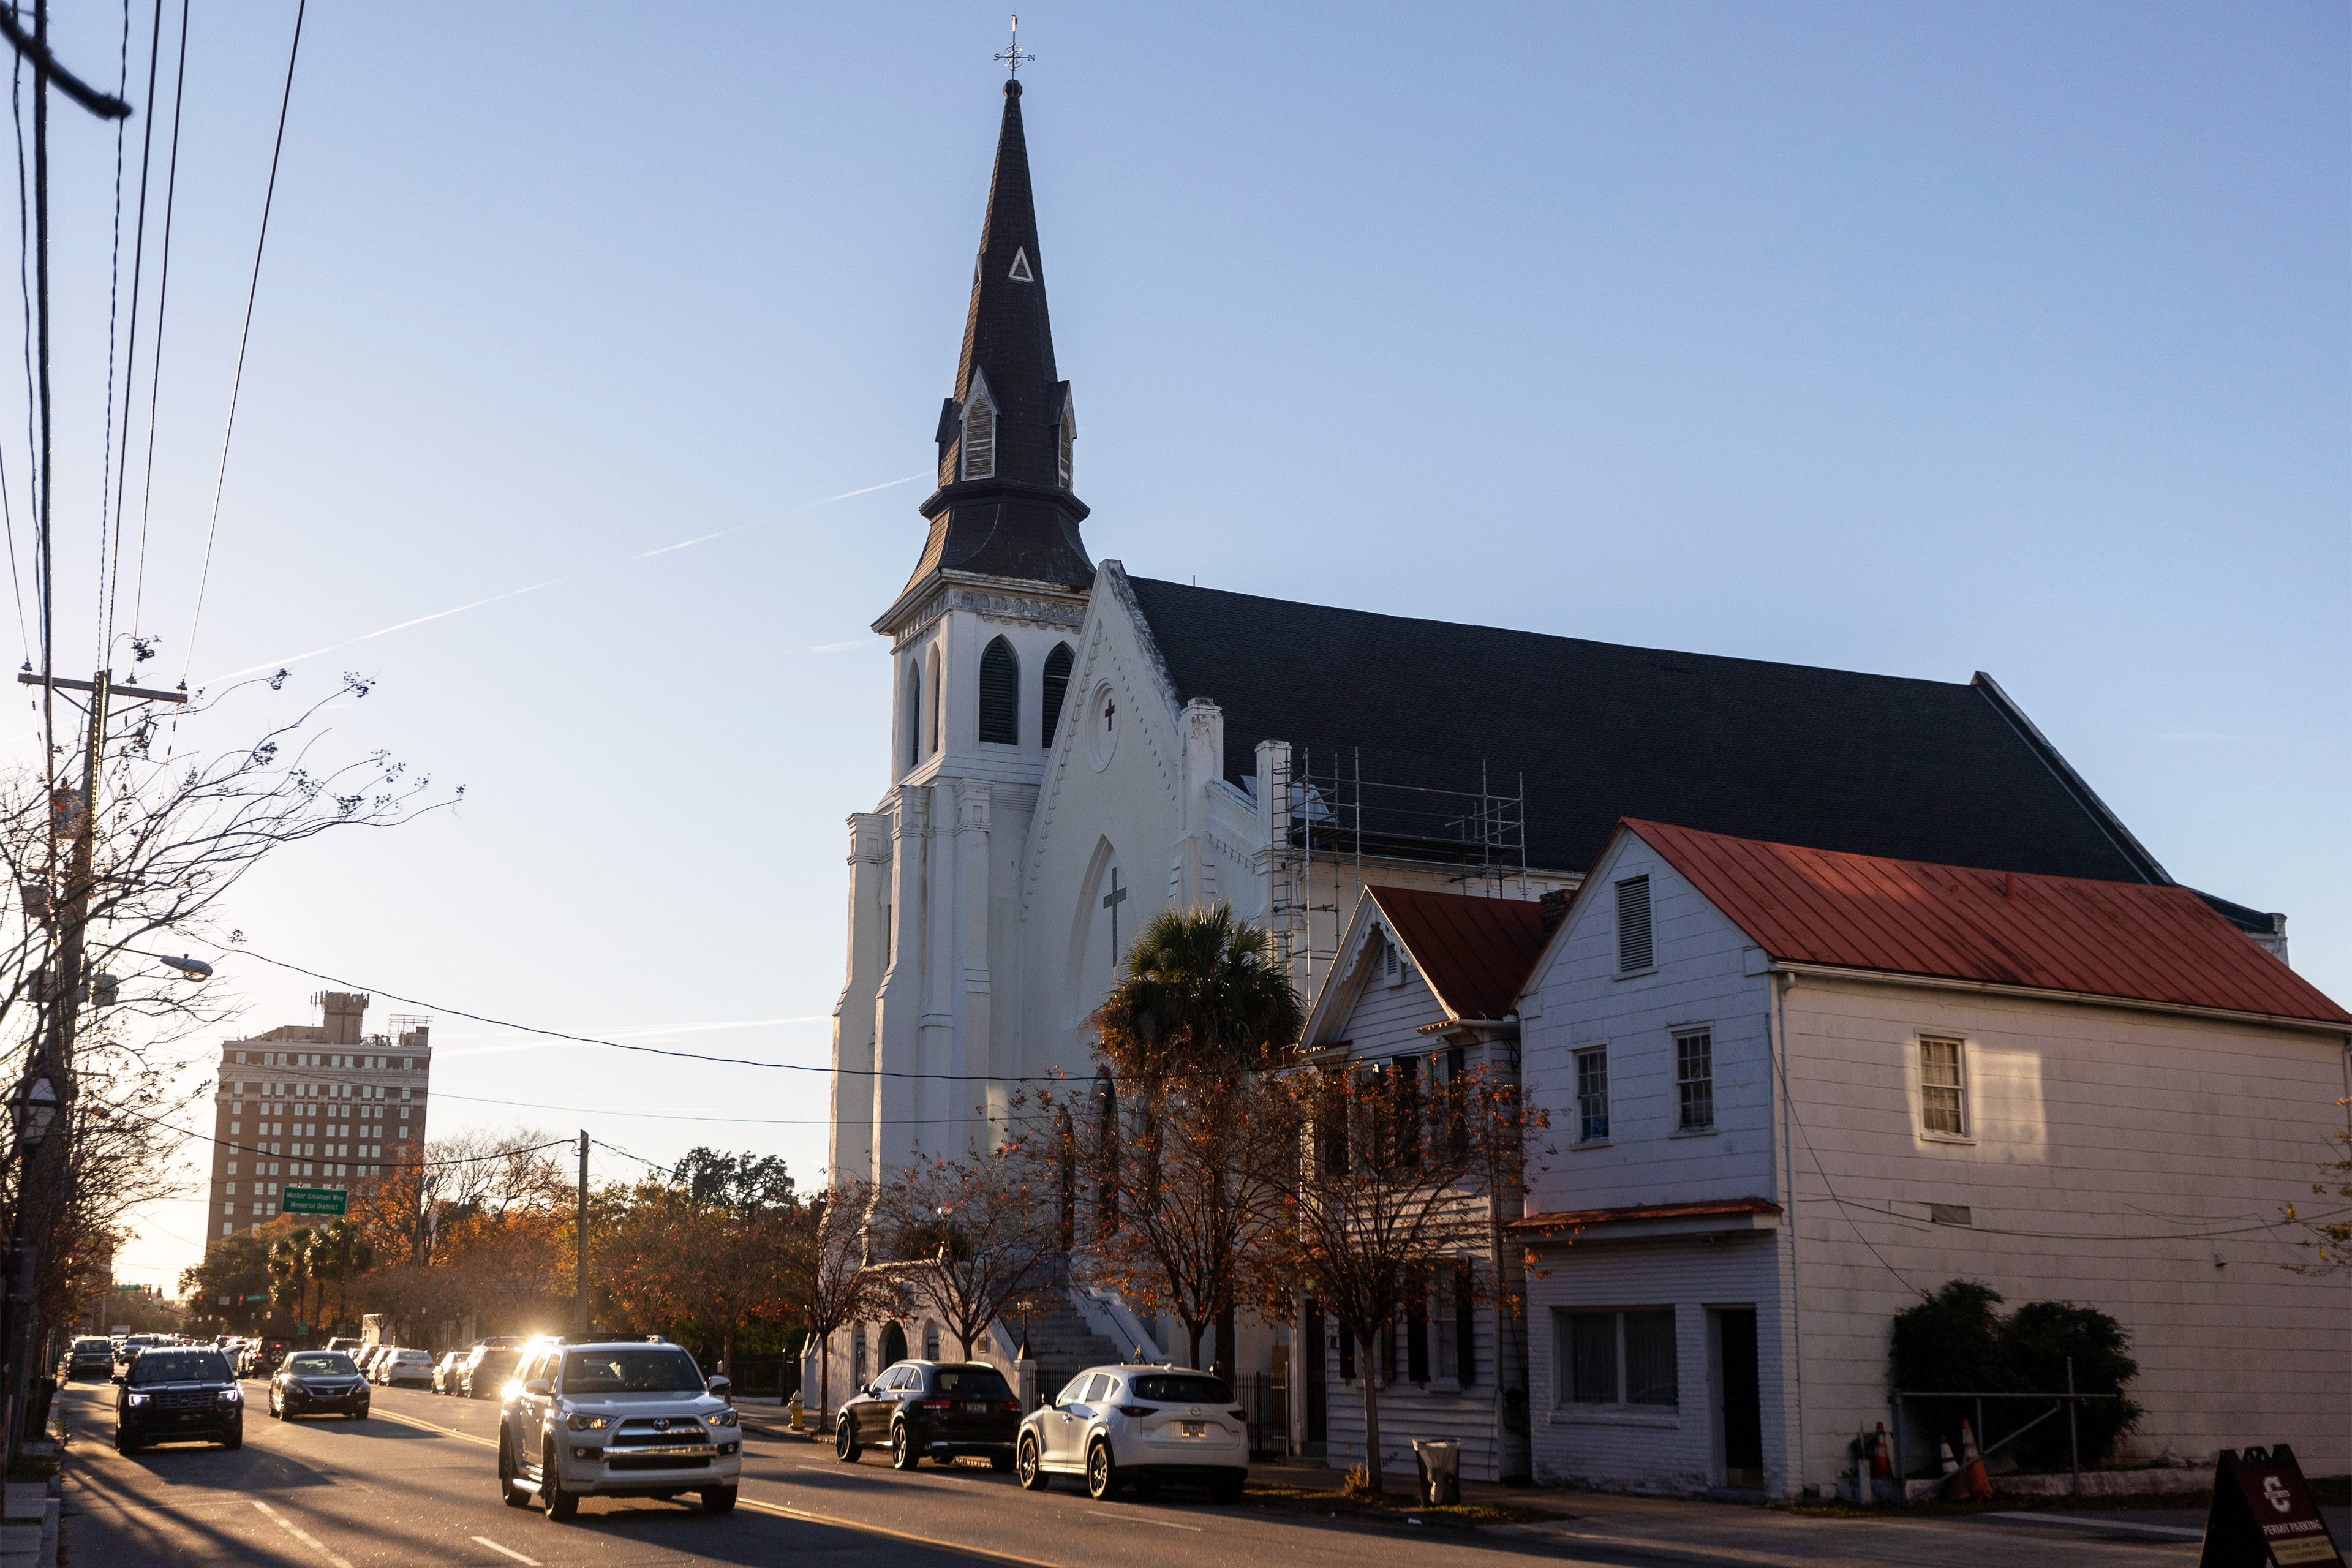 A photo shows the exterior of Mother Emanuel African Methodist Episcopal Church.